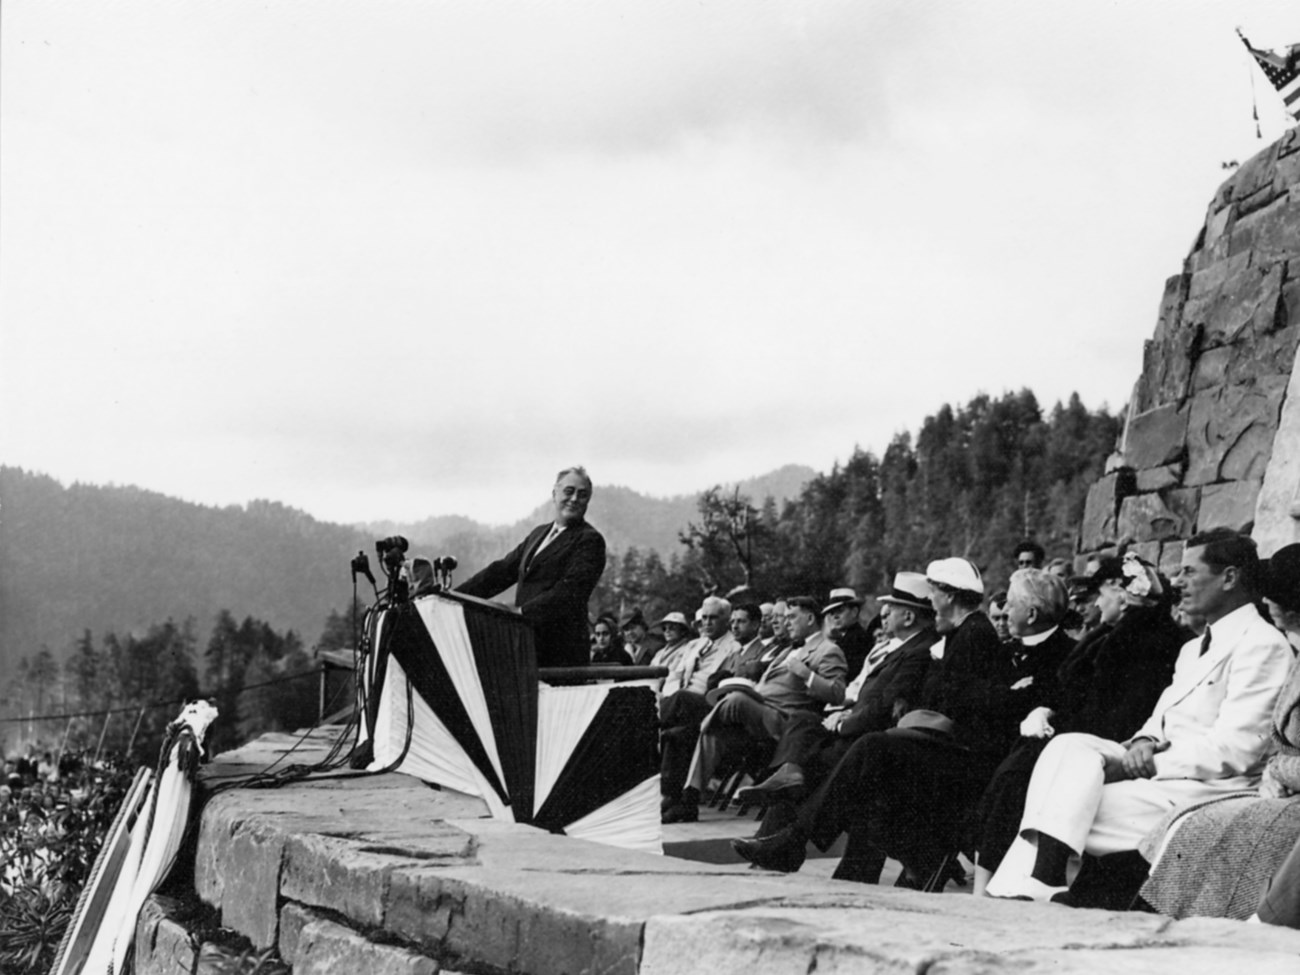 A man at a podium (FDR) speaks to a crowd in a mountainous landscape.